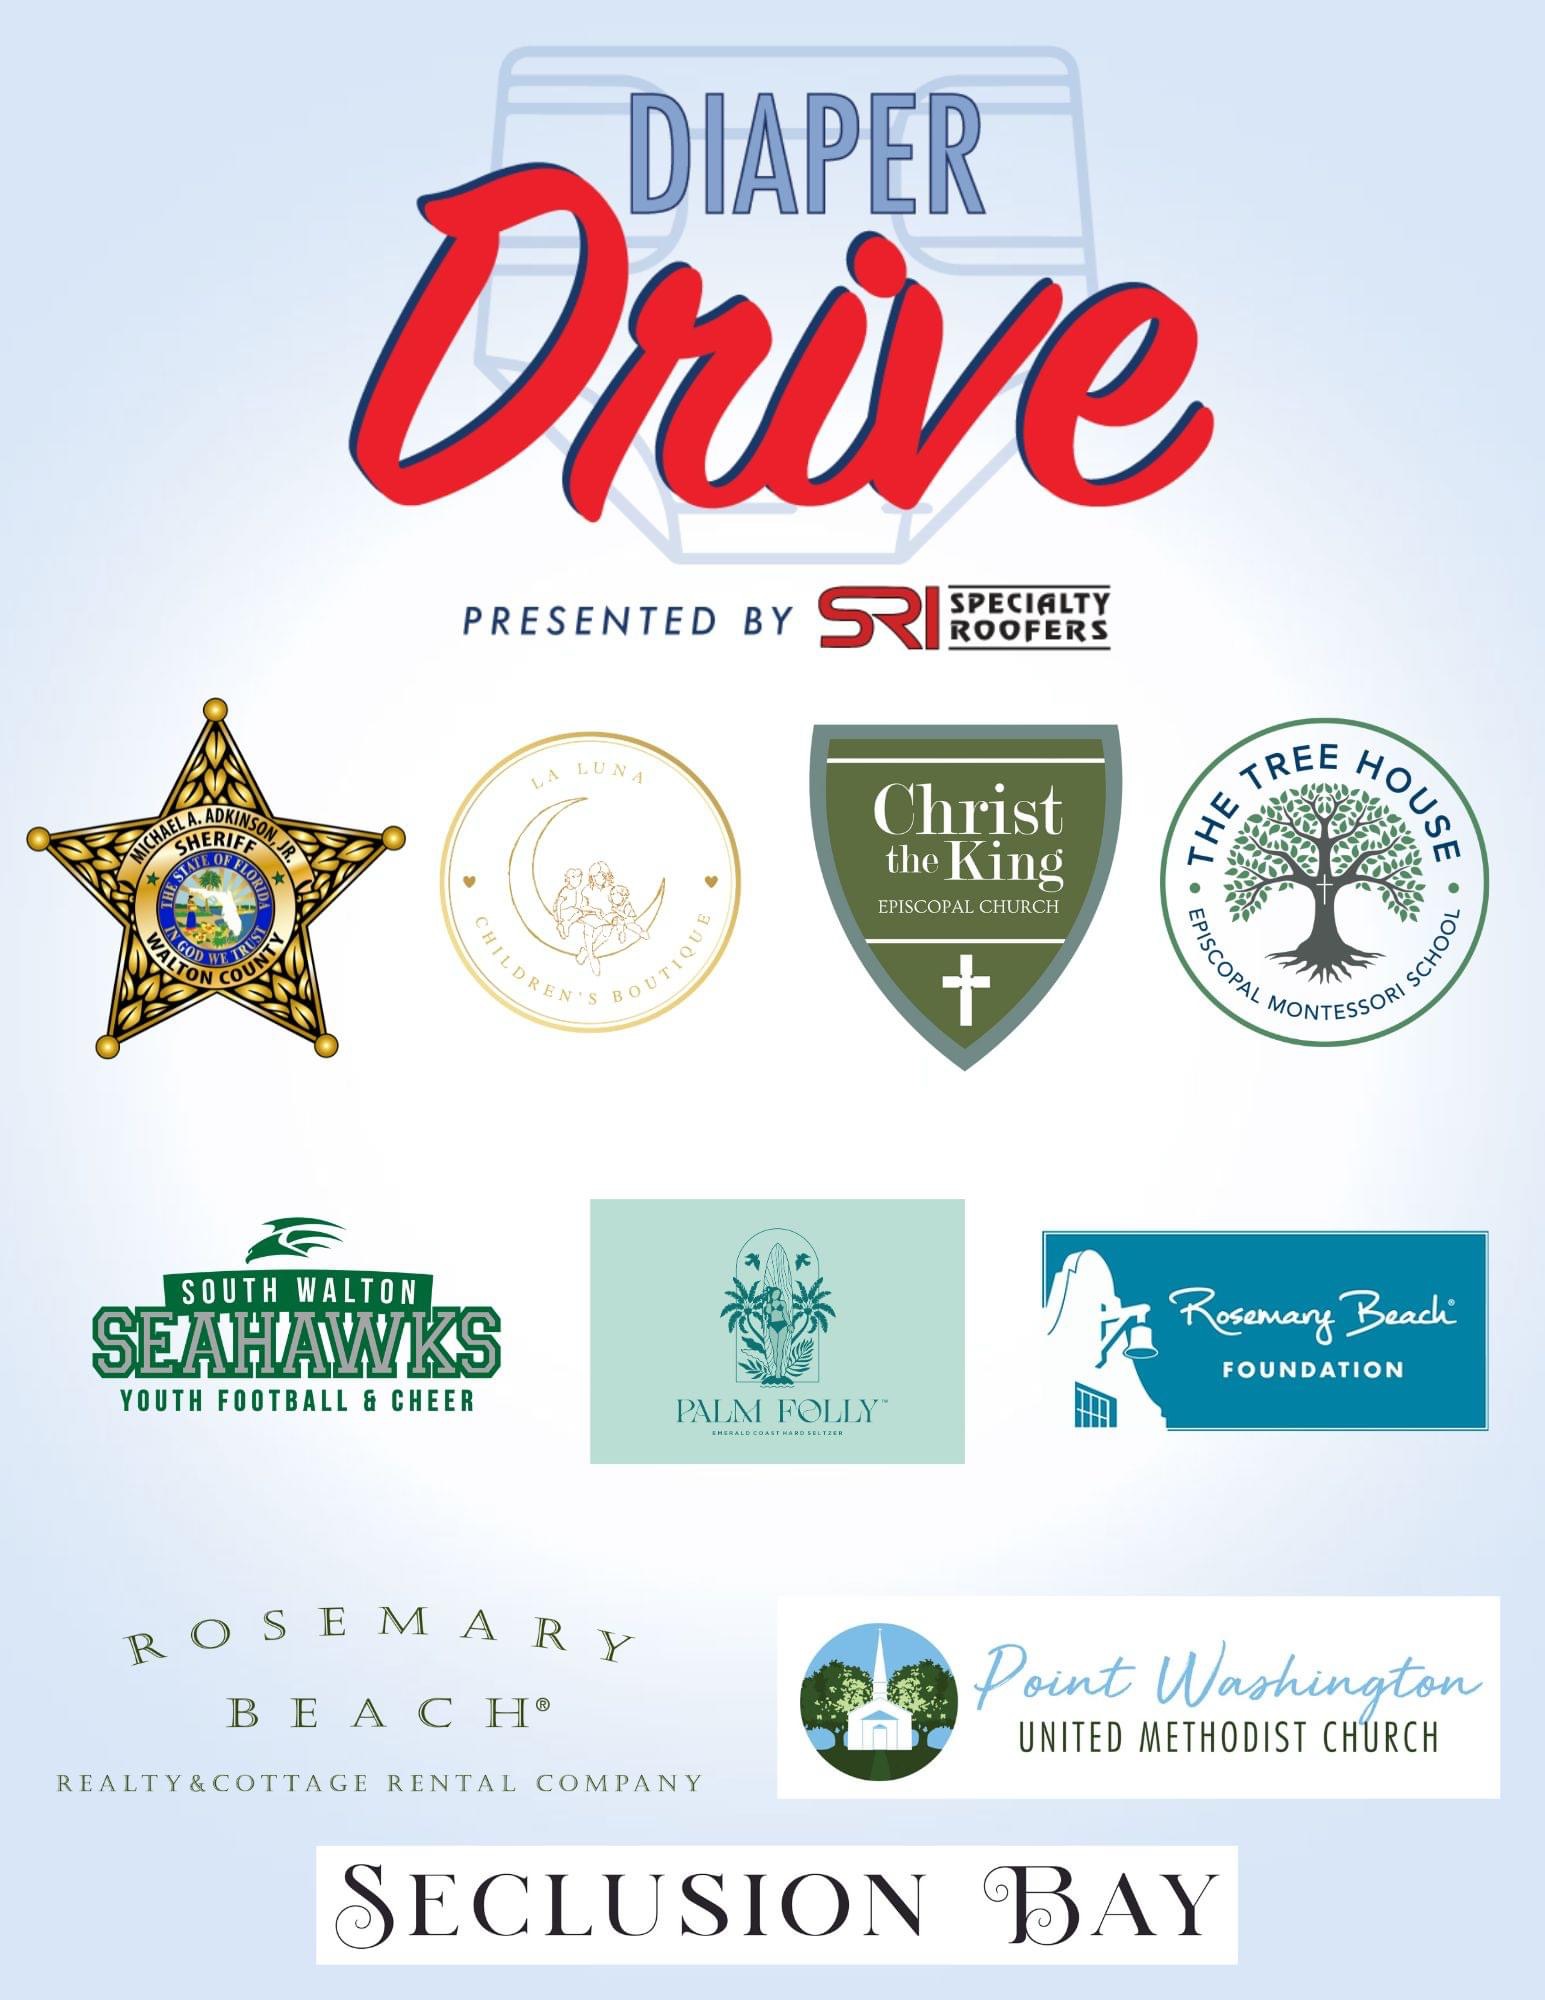 Caring & Sharing of South Walton and Walton County Sheriff’s Office Hold Diaper Drive